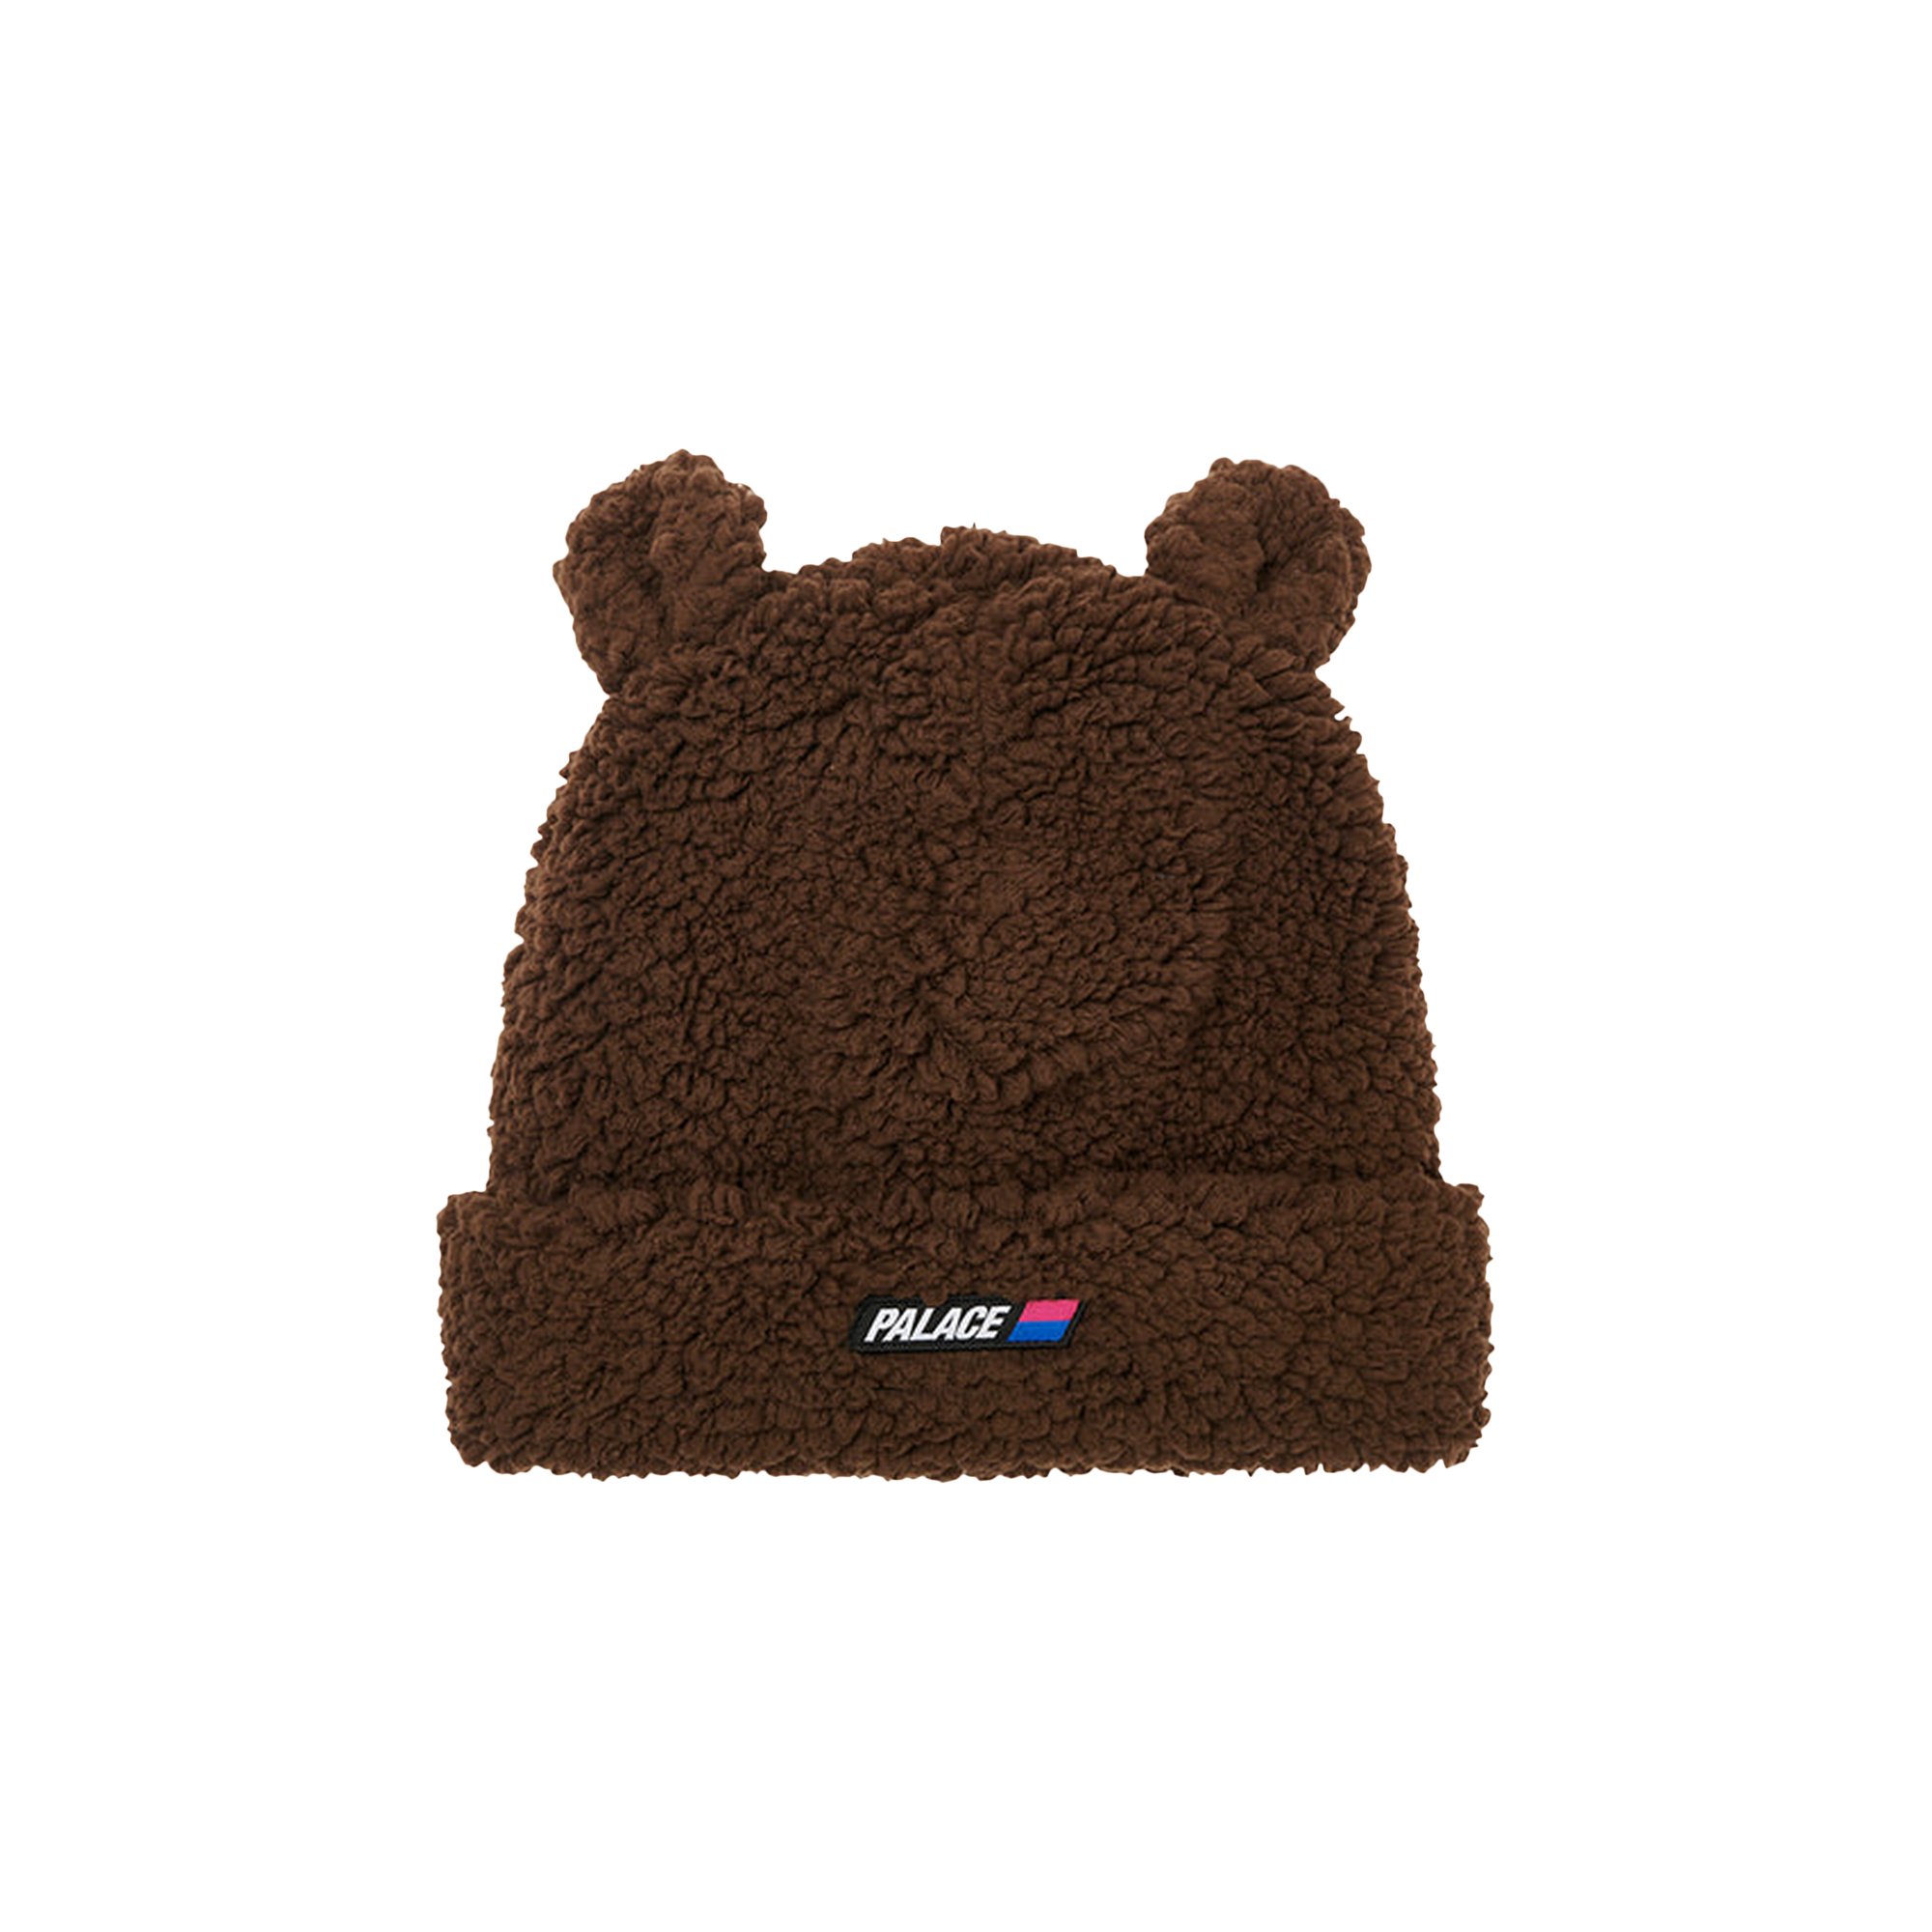 Palace Fuzzy Ear Beanie 'Brown' | GOAT